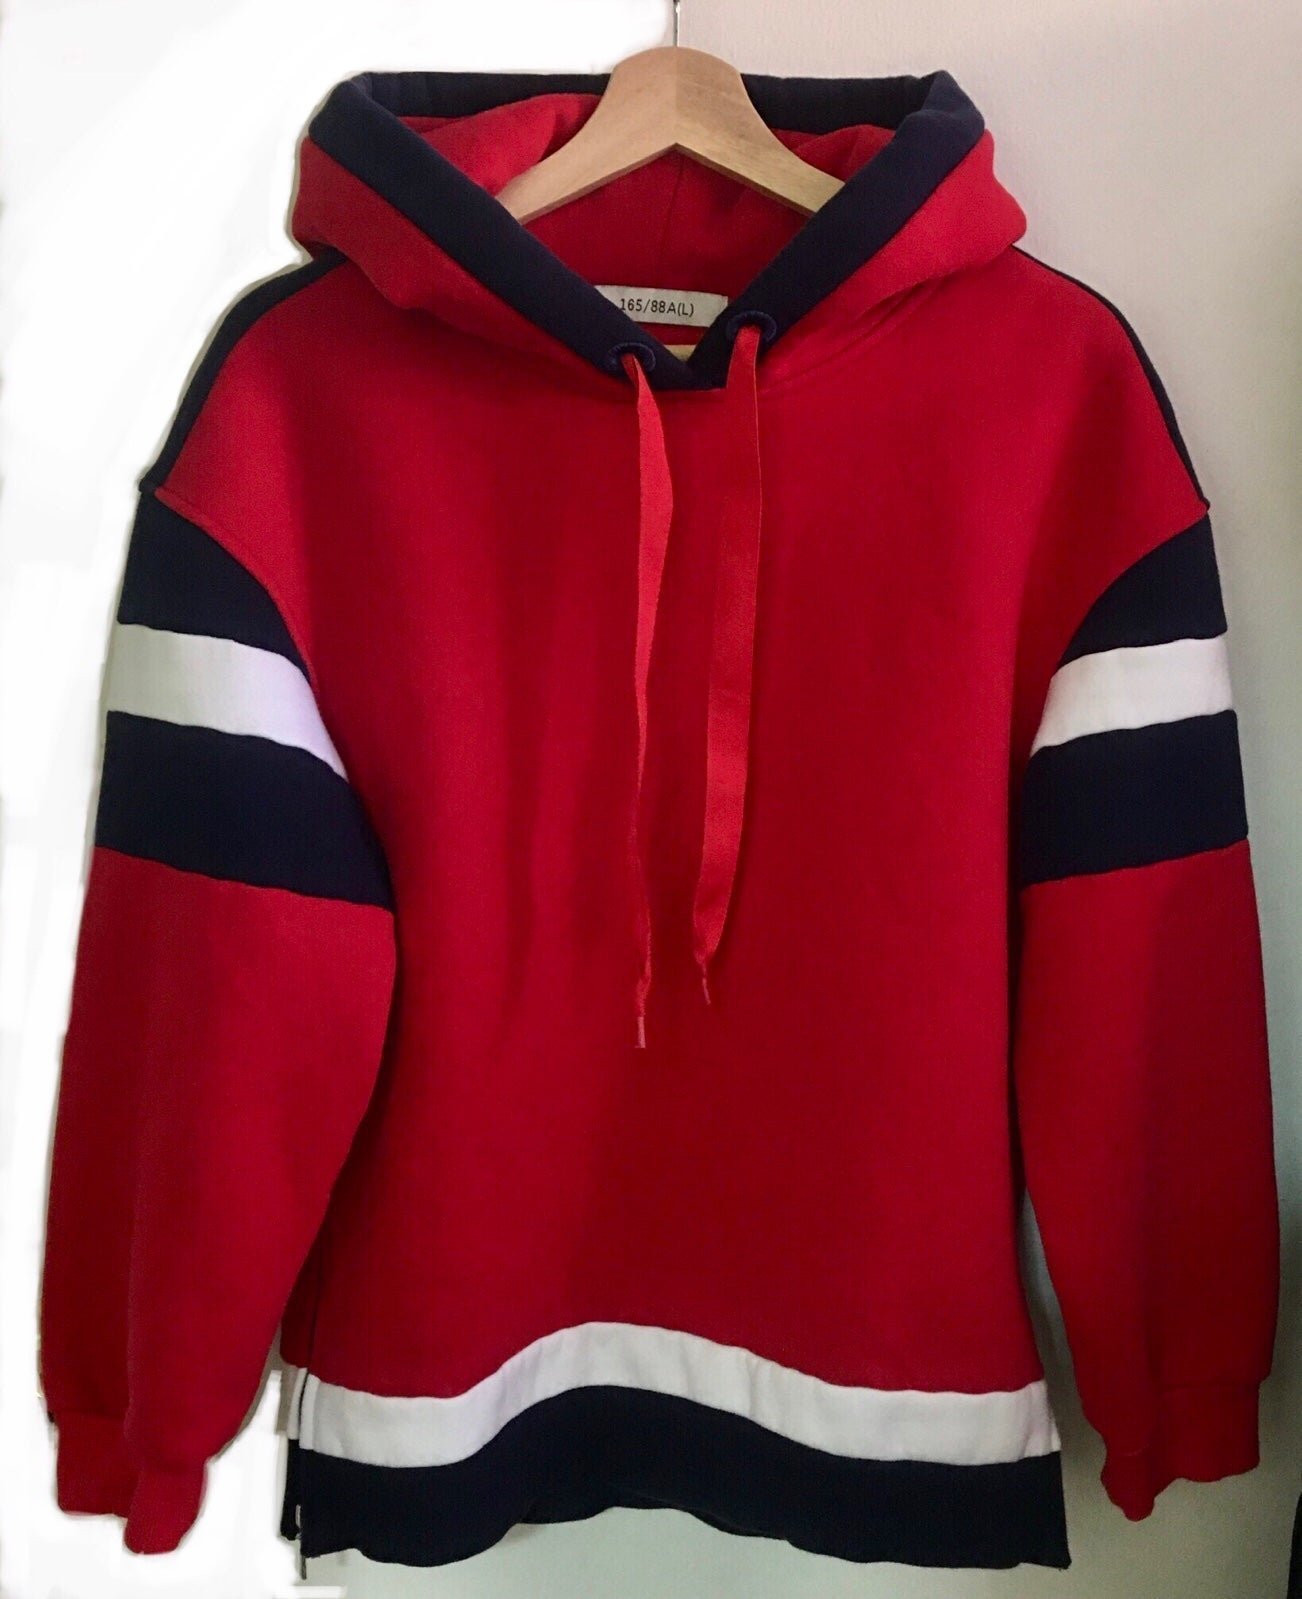 reasonable price Cute red hoodie good for Holidays ! o4shlUZTx hot sale